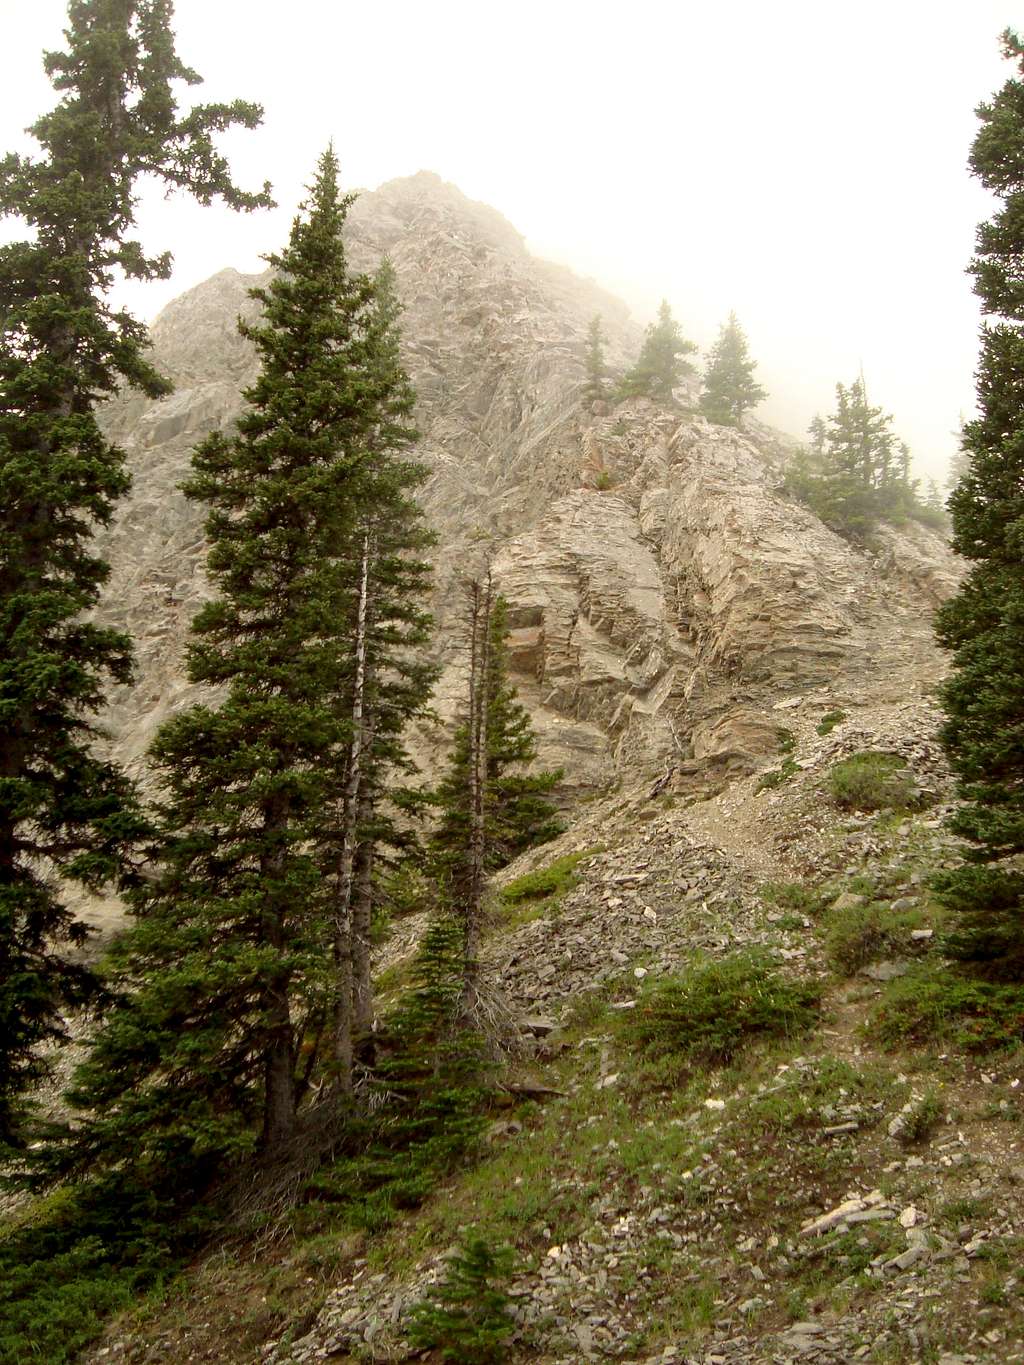 The lower part of the Alan Kane route on West Baldy